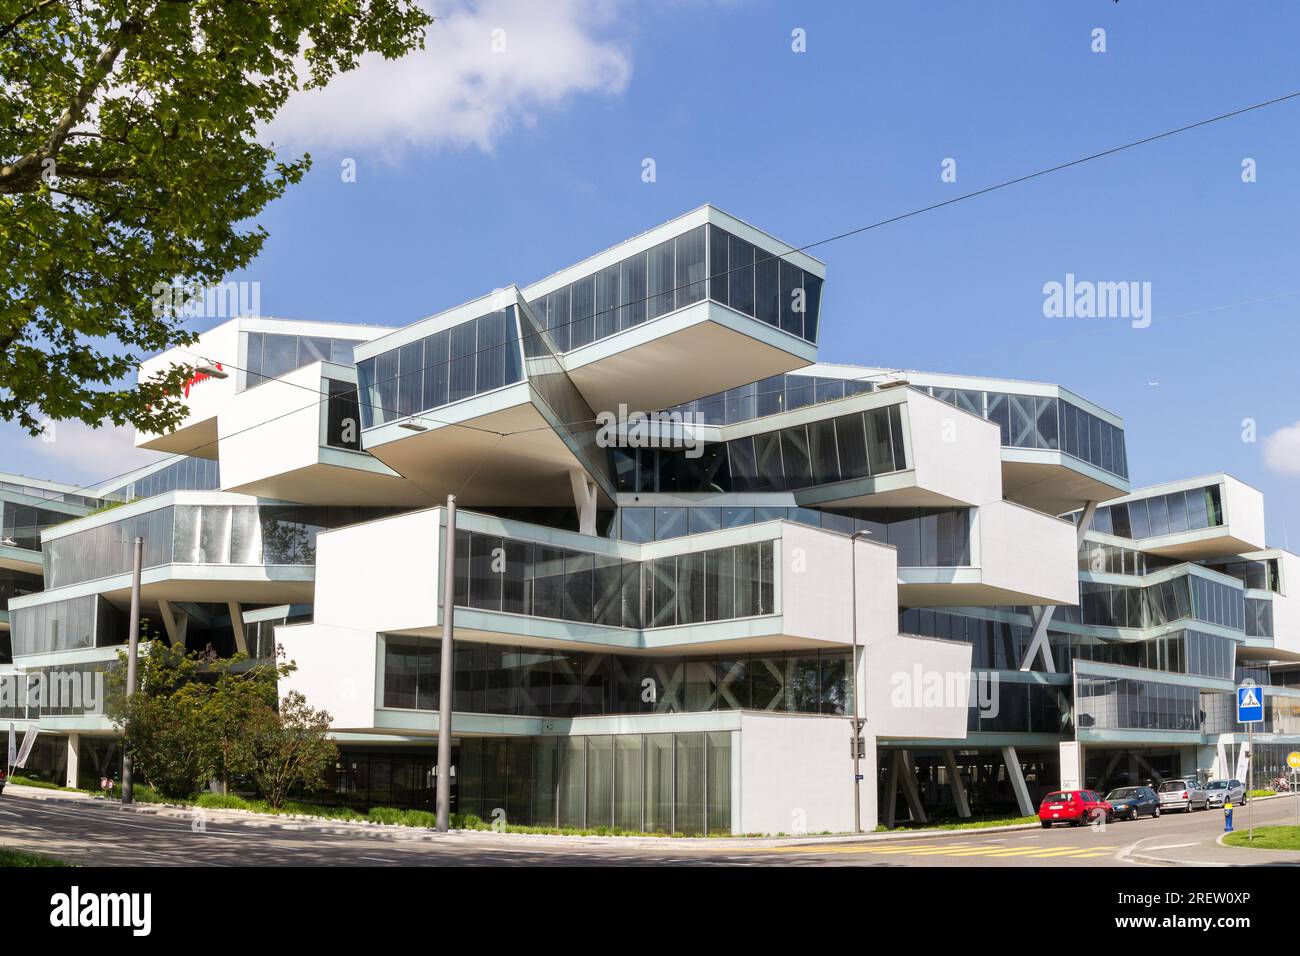 Allschwil, Switzerland - 09. May 2022: The modern architecture of business center of Johnson and Johnson,  which is a world famous company for pharmac Stock Photo